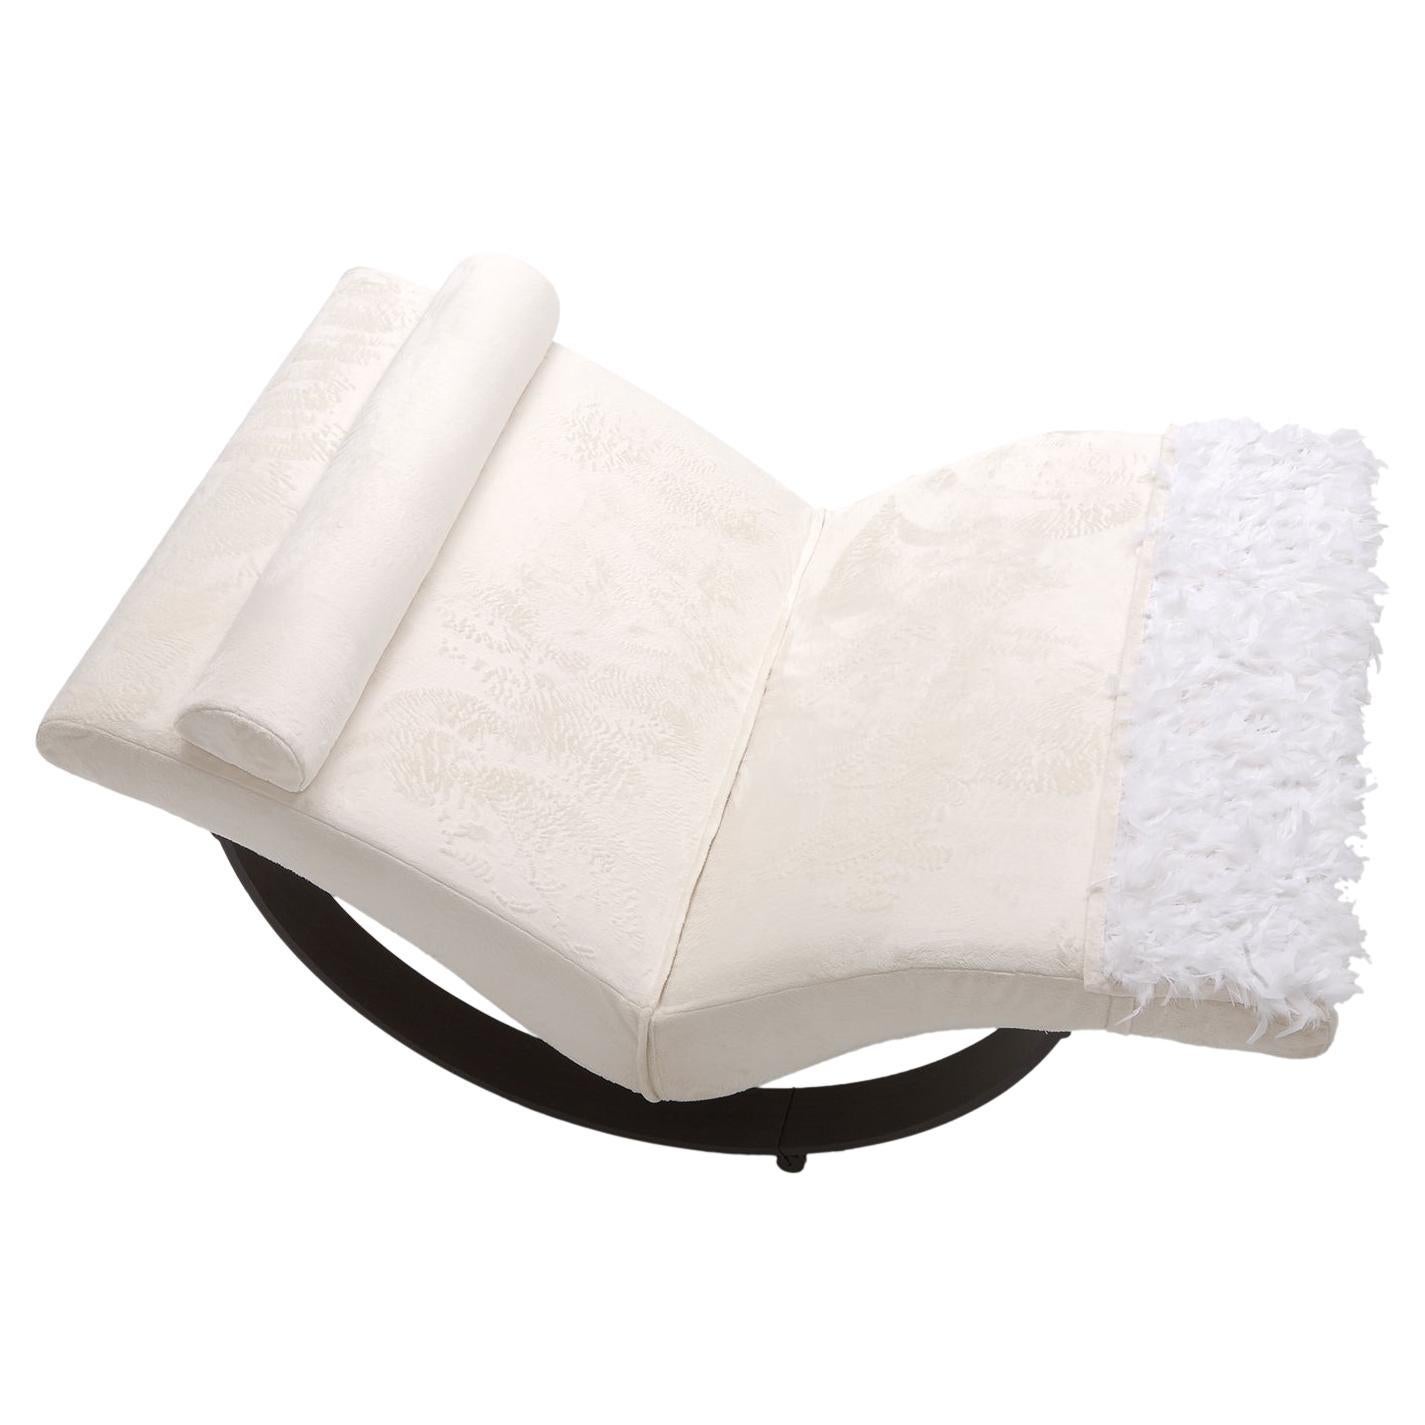 Giovannetti, Modern Relaxing Rocking Armchair by S. Gil, White "Gabbiano"